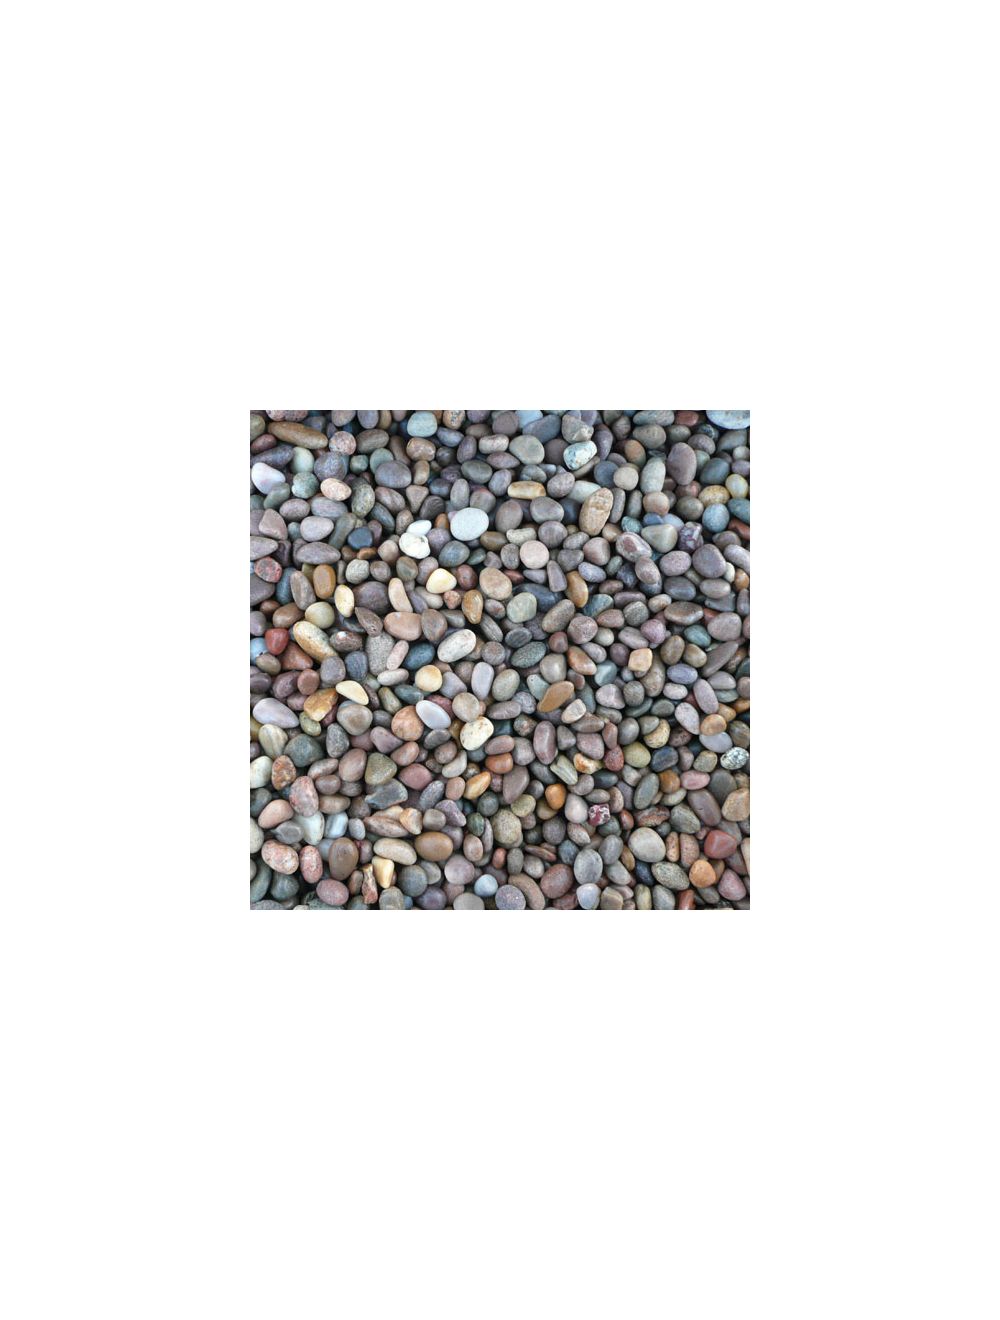 Quarrystore Assorted Scottish Beach Pebbles from 14mm to 20mm in Size 20kg Bag Ideal Outside Decorative Stones for Gardens and Craft Projects